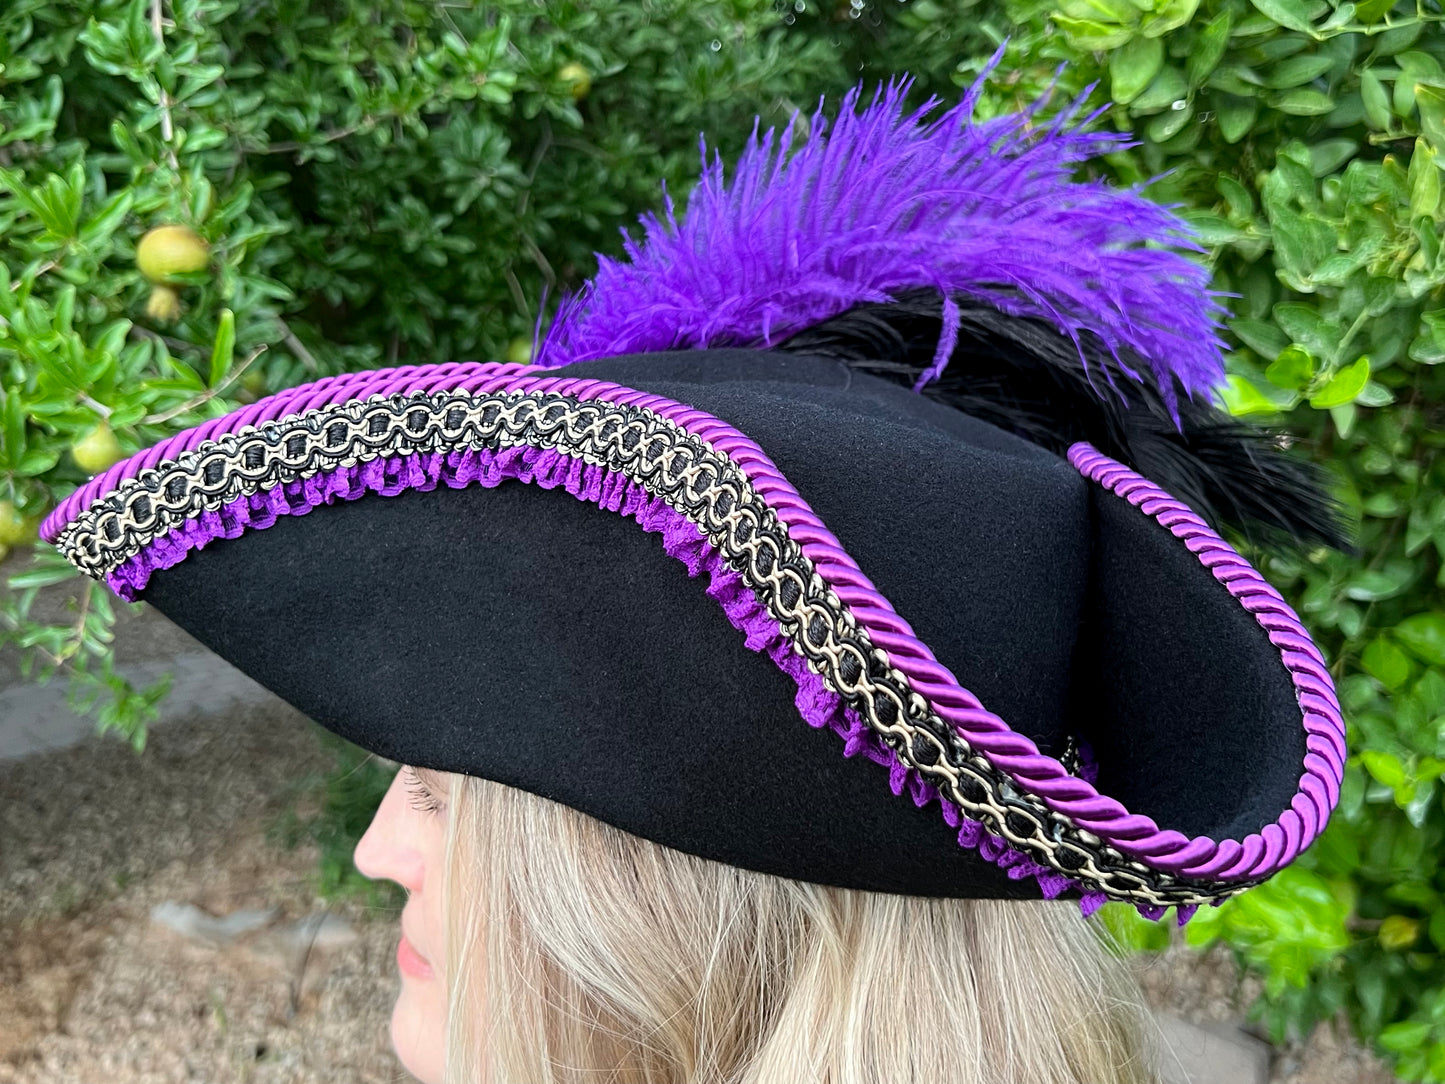 Tricorn Hat 22.5" Black Wool Base with Purple Trim, Feathers, and Silver Brooch